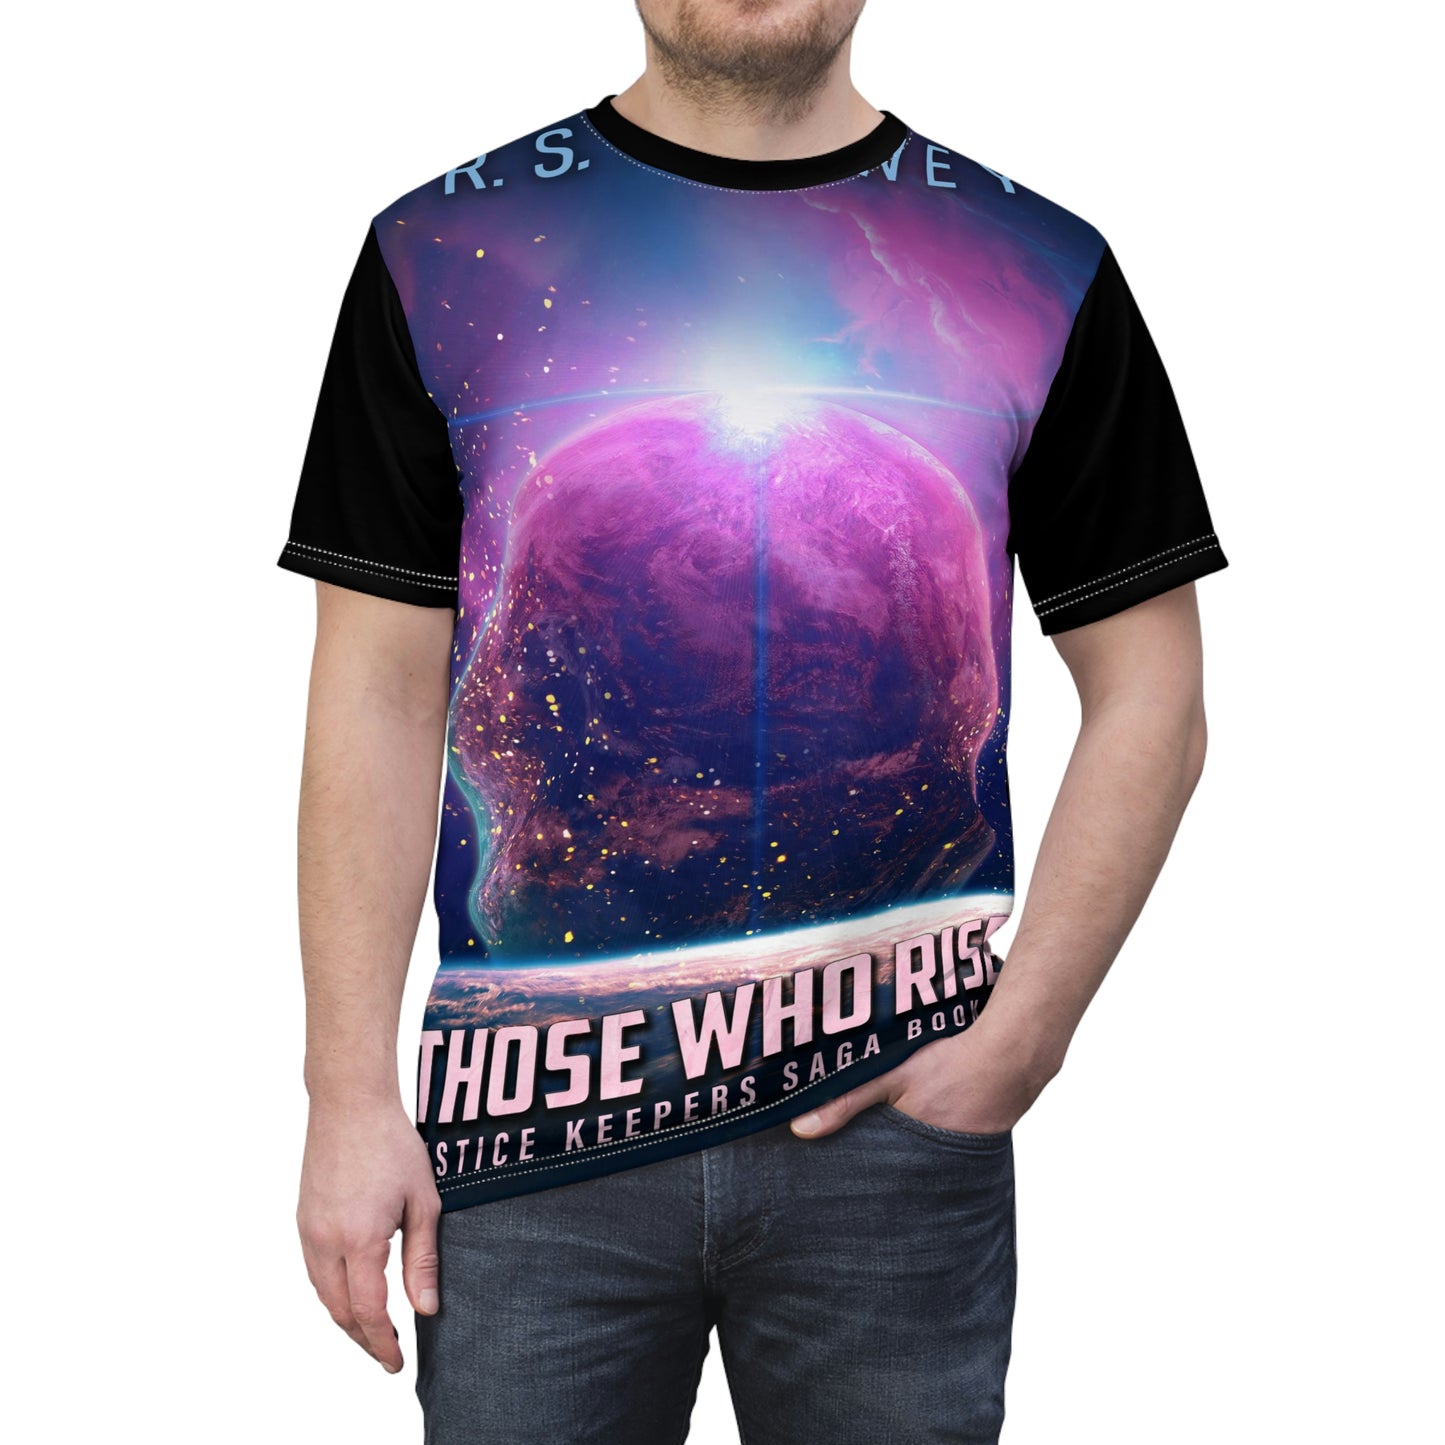 Those Who Rise - Unisex All-Over Print Cut & Sew T-Shirt